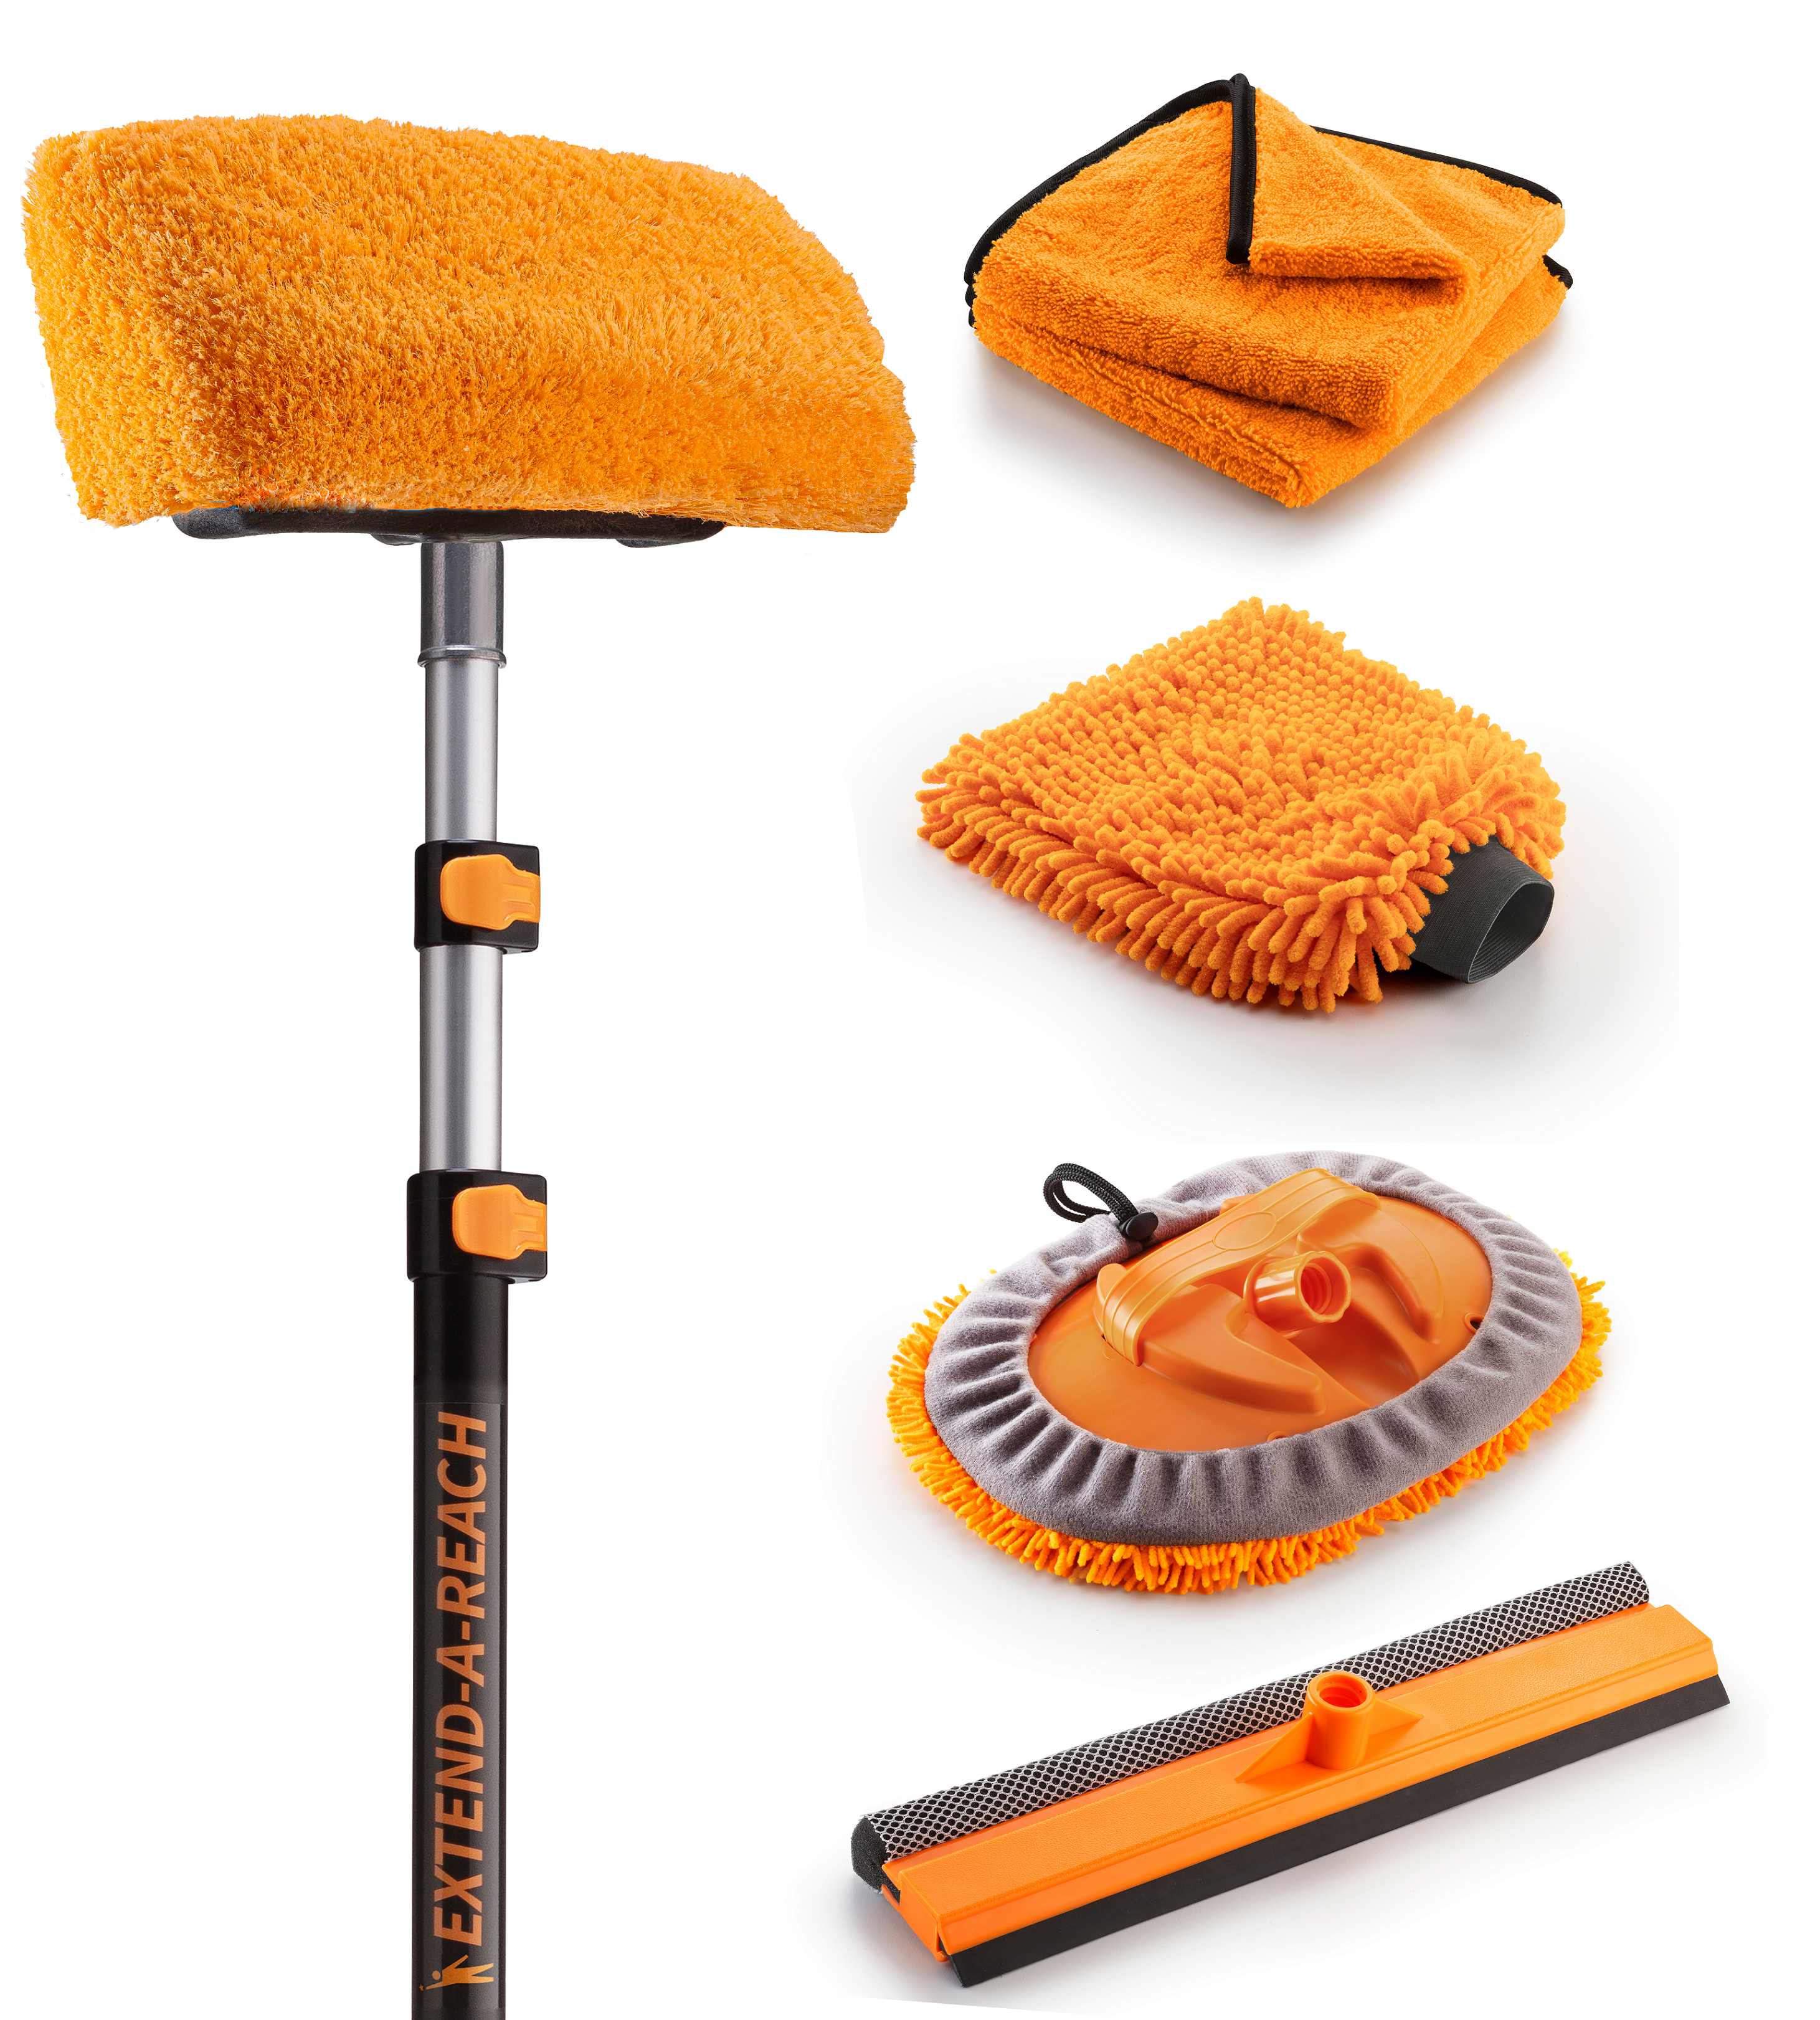 Wash Brushes & Drying Tools for Boats and RV's